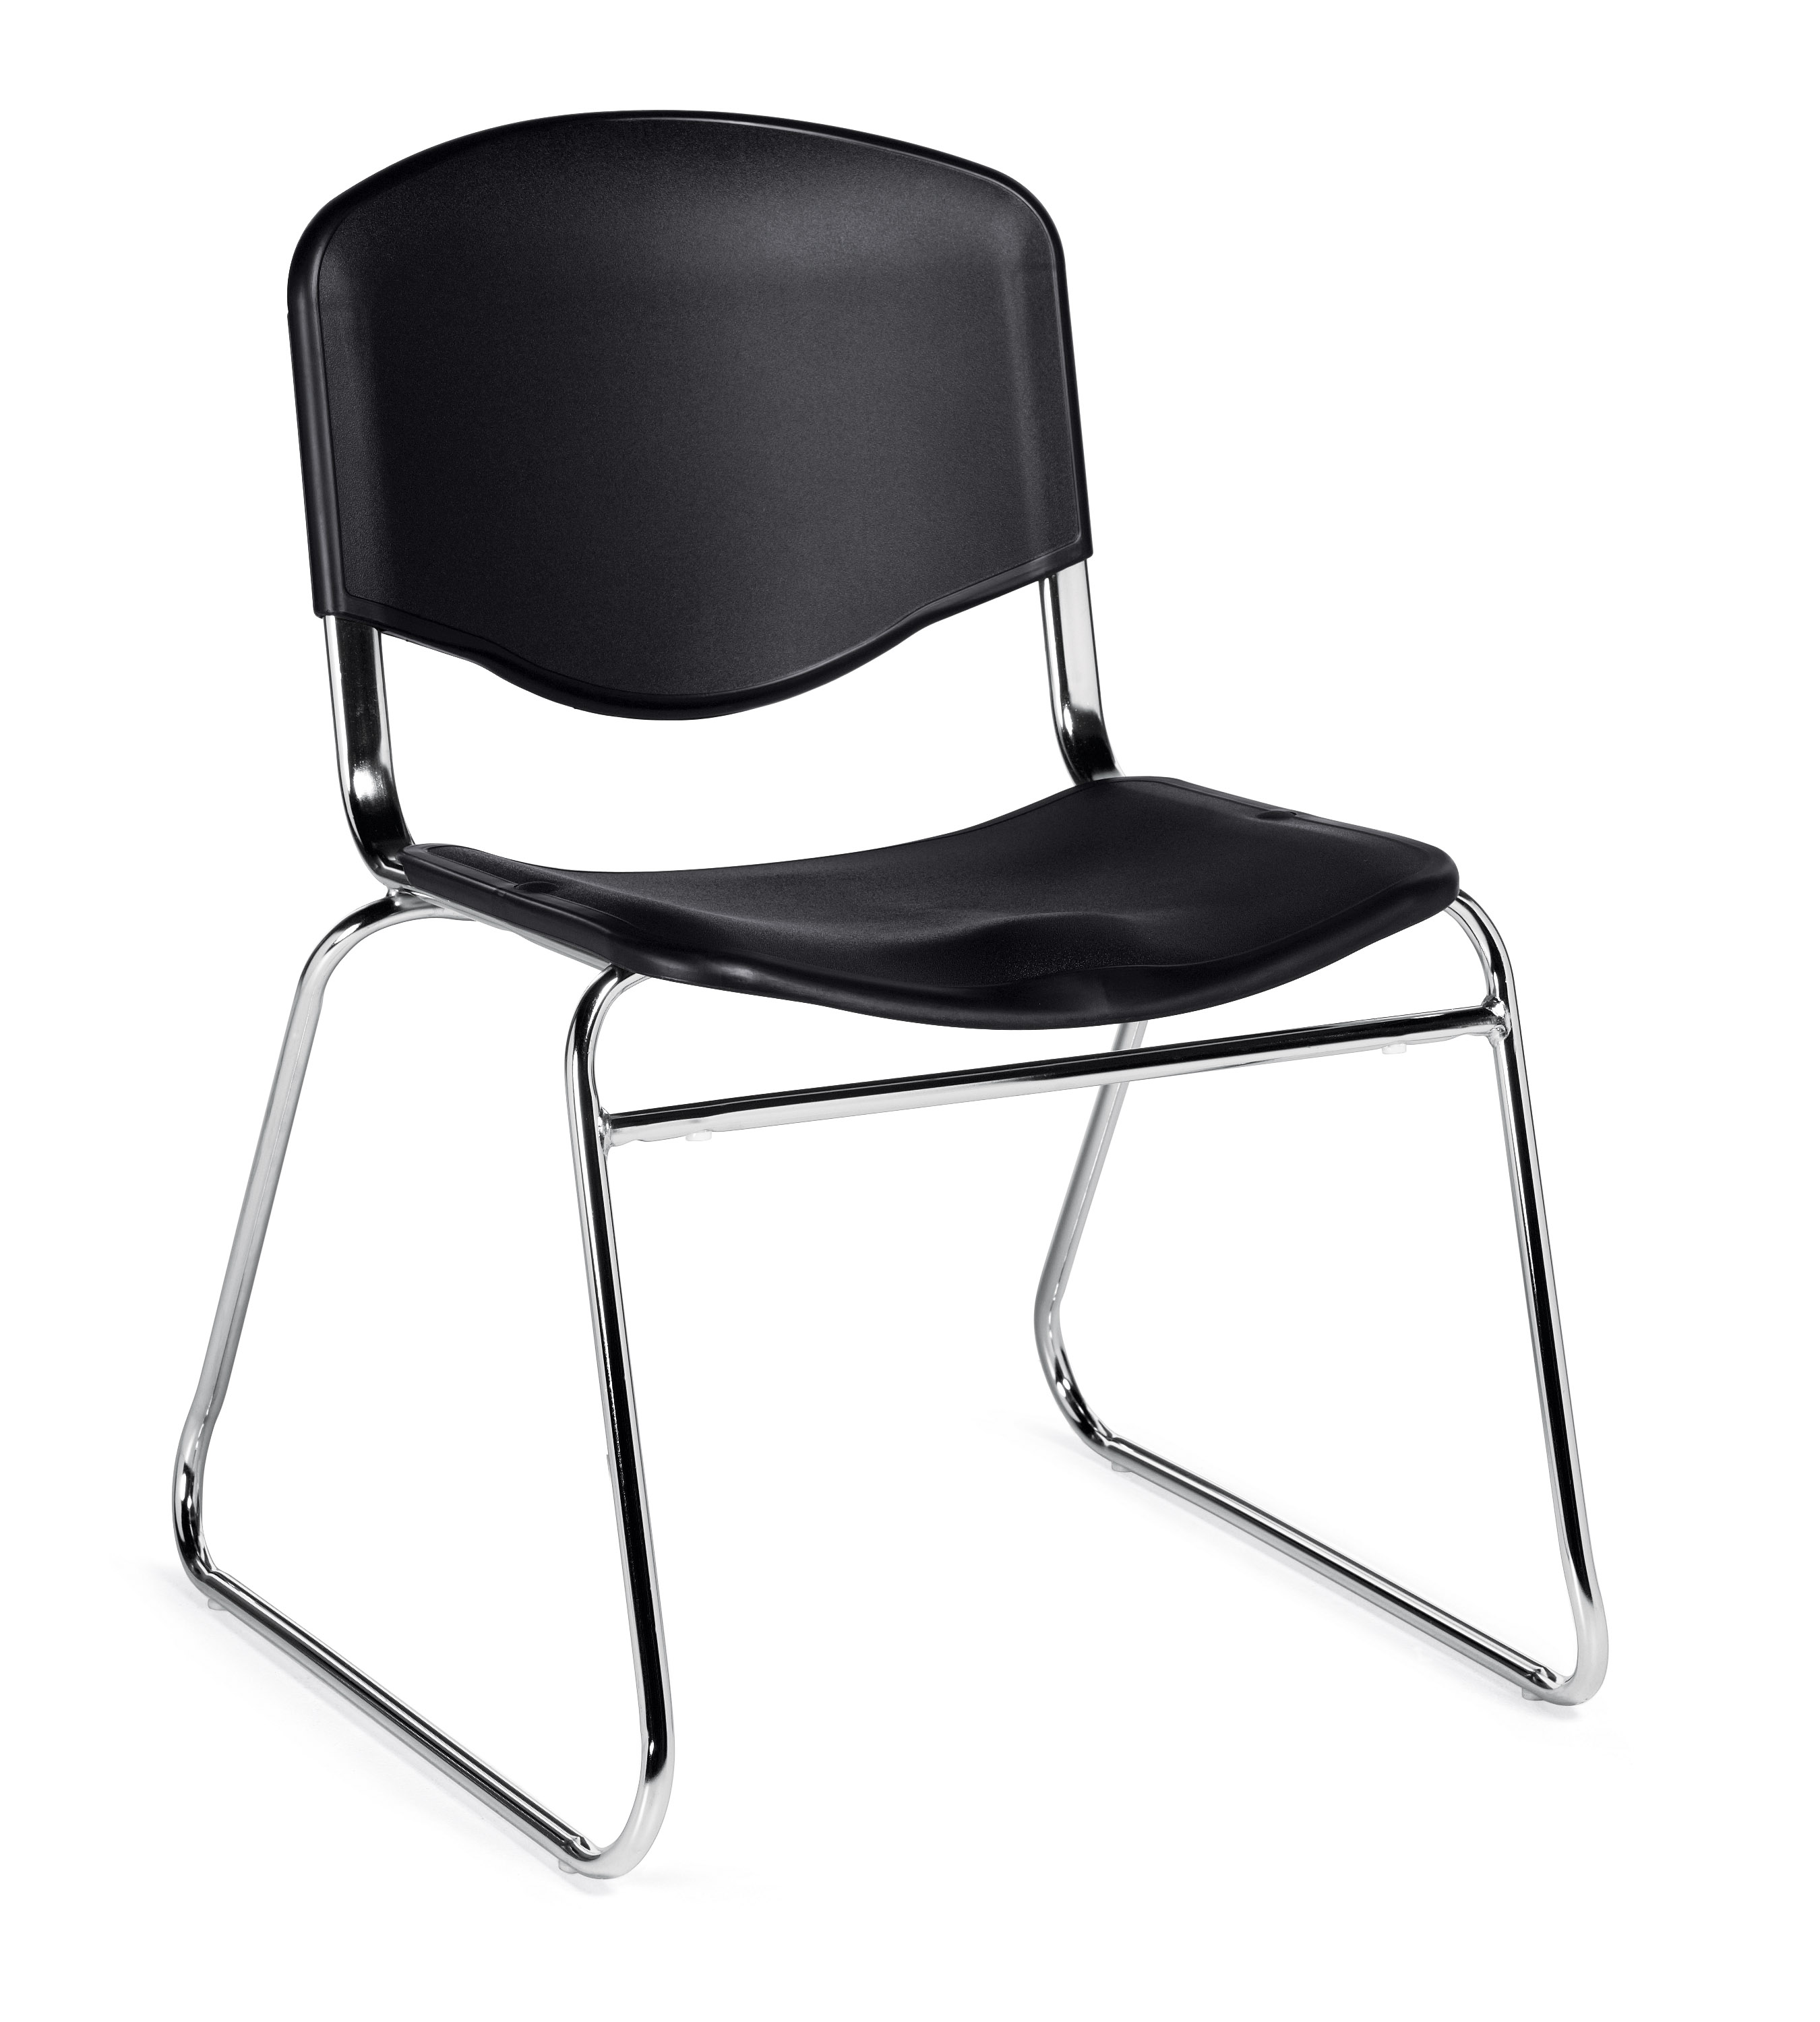 chairs-for-office-stackable-office-chairs.jpg